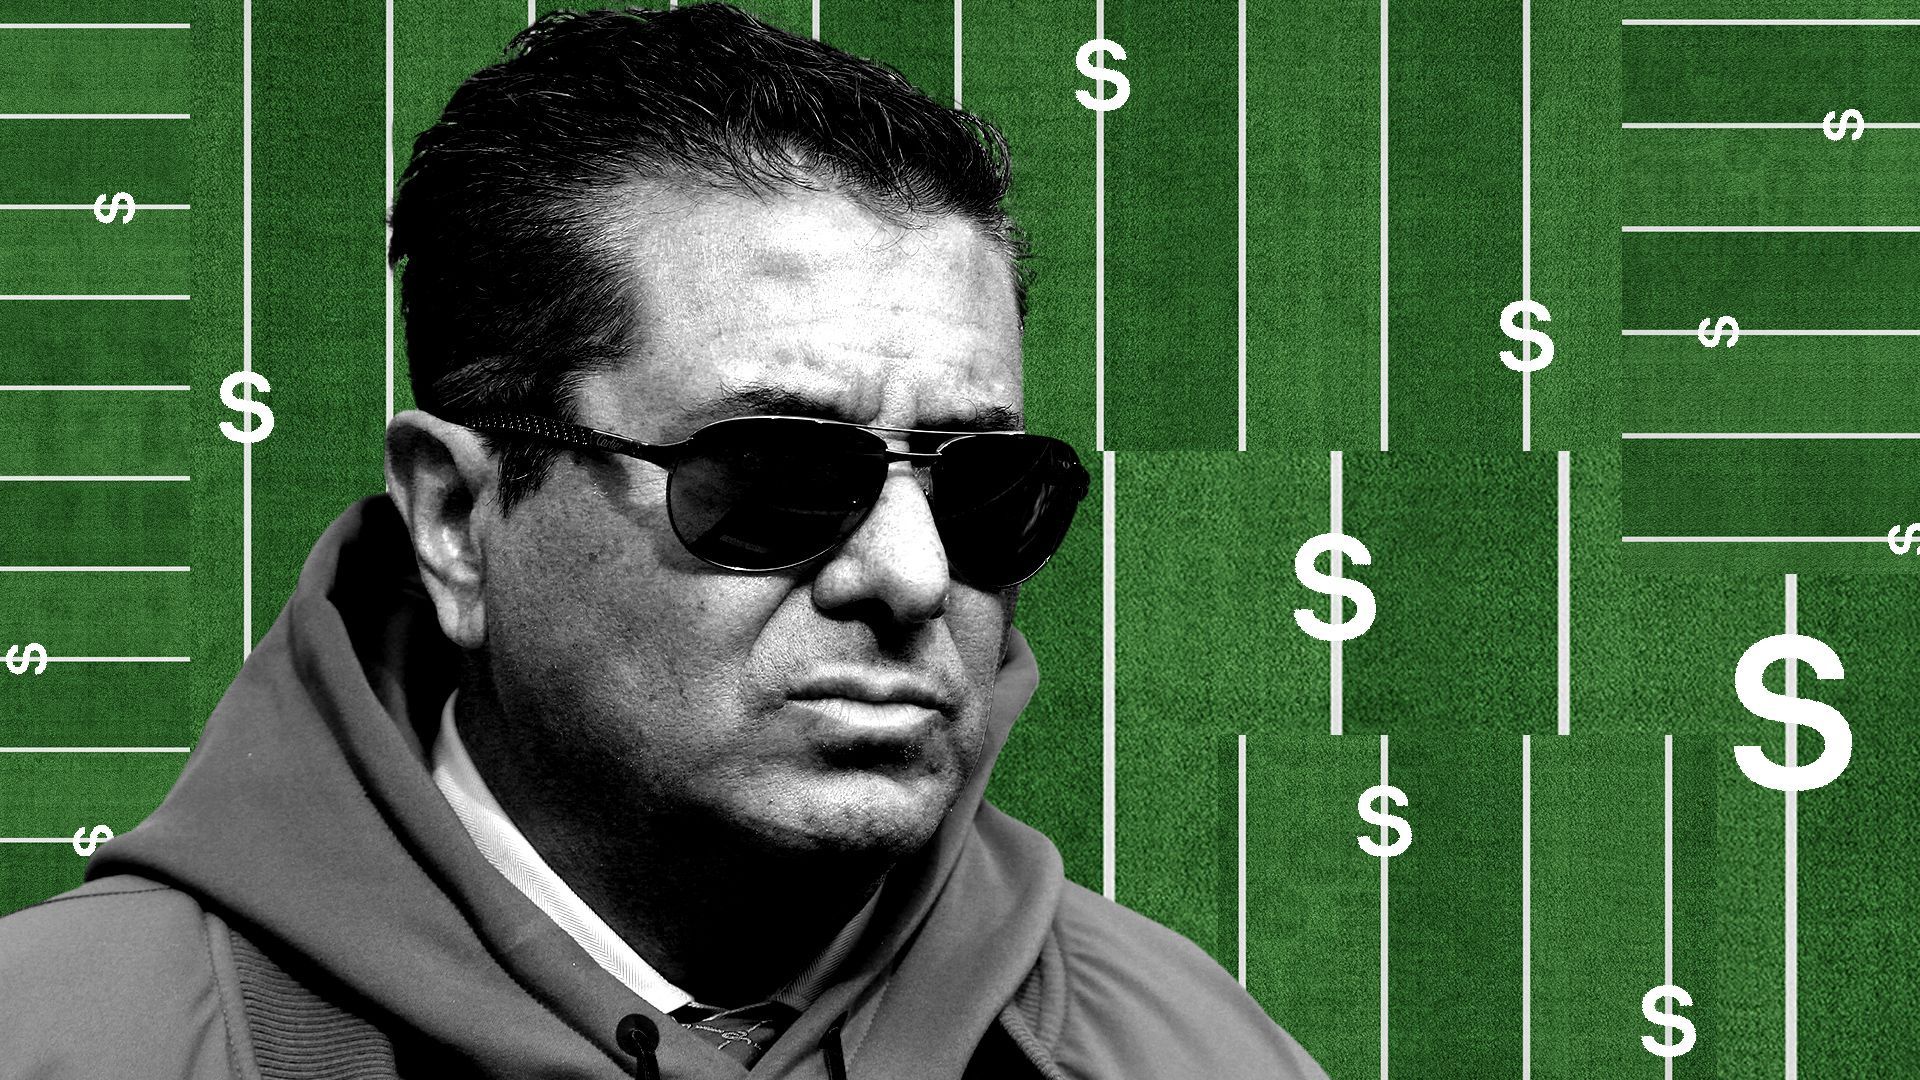 Photo illustration of Dan Snyder on an abstract background made up of dollar bill signs and football pitches